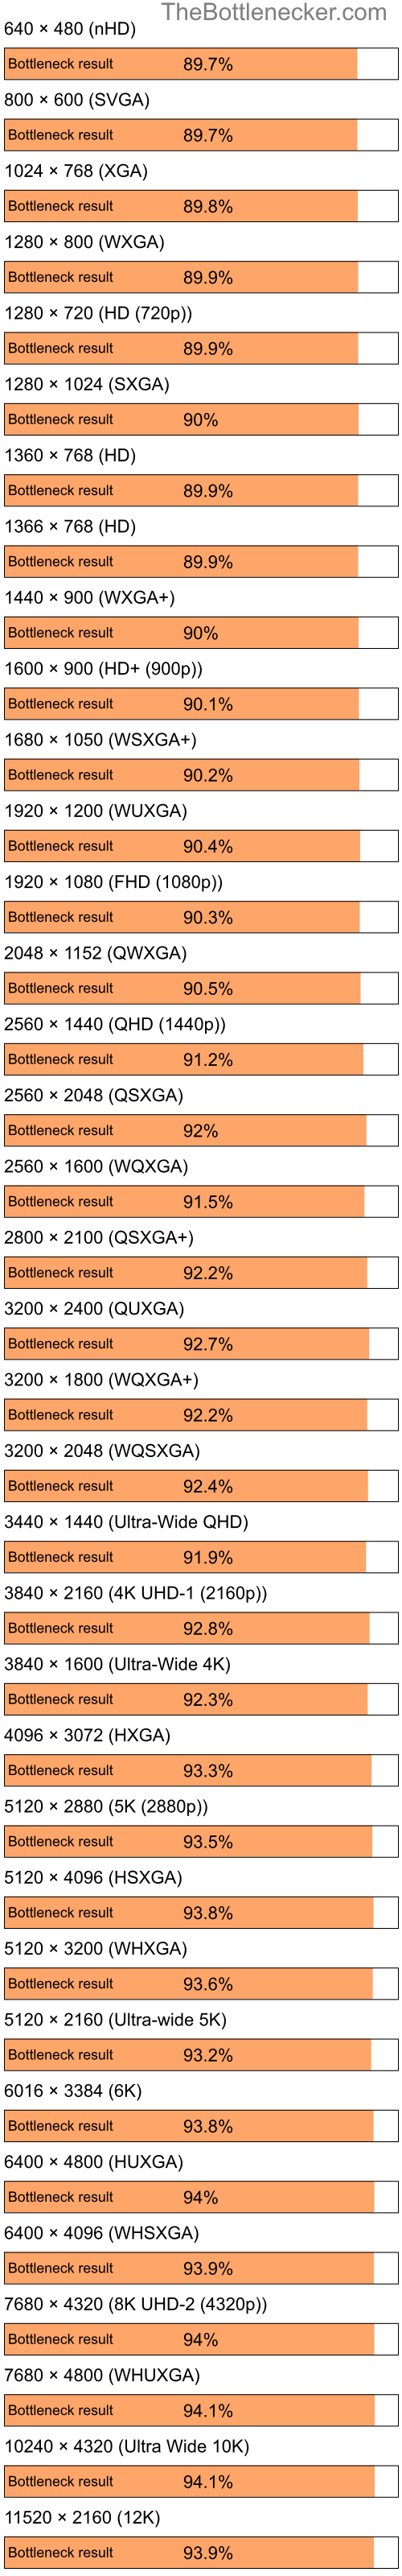 Bottleneck results by resolution for Intel Pentium 4 and NVIDIA GeForce FX 5600XT in Graphic Card Intense Tasks